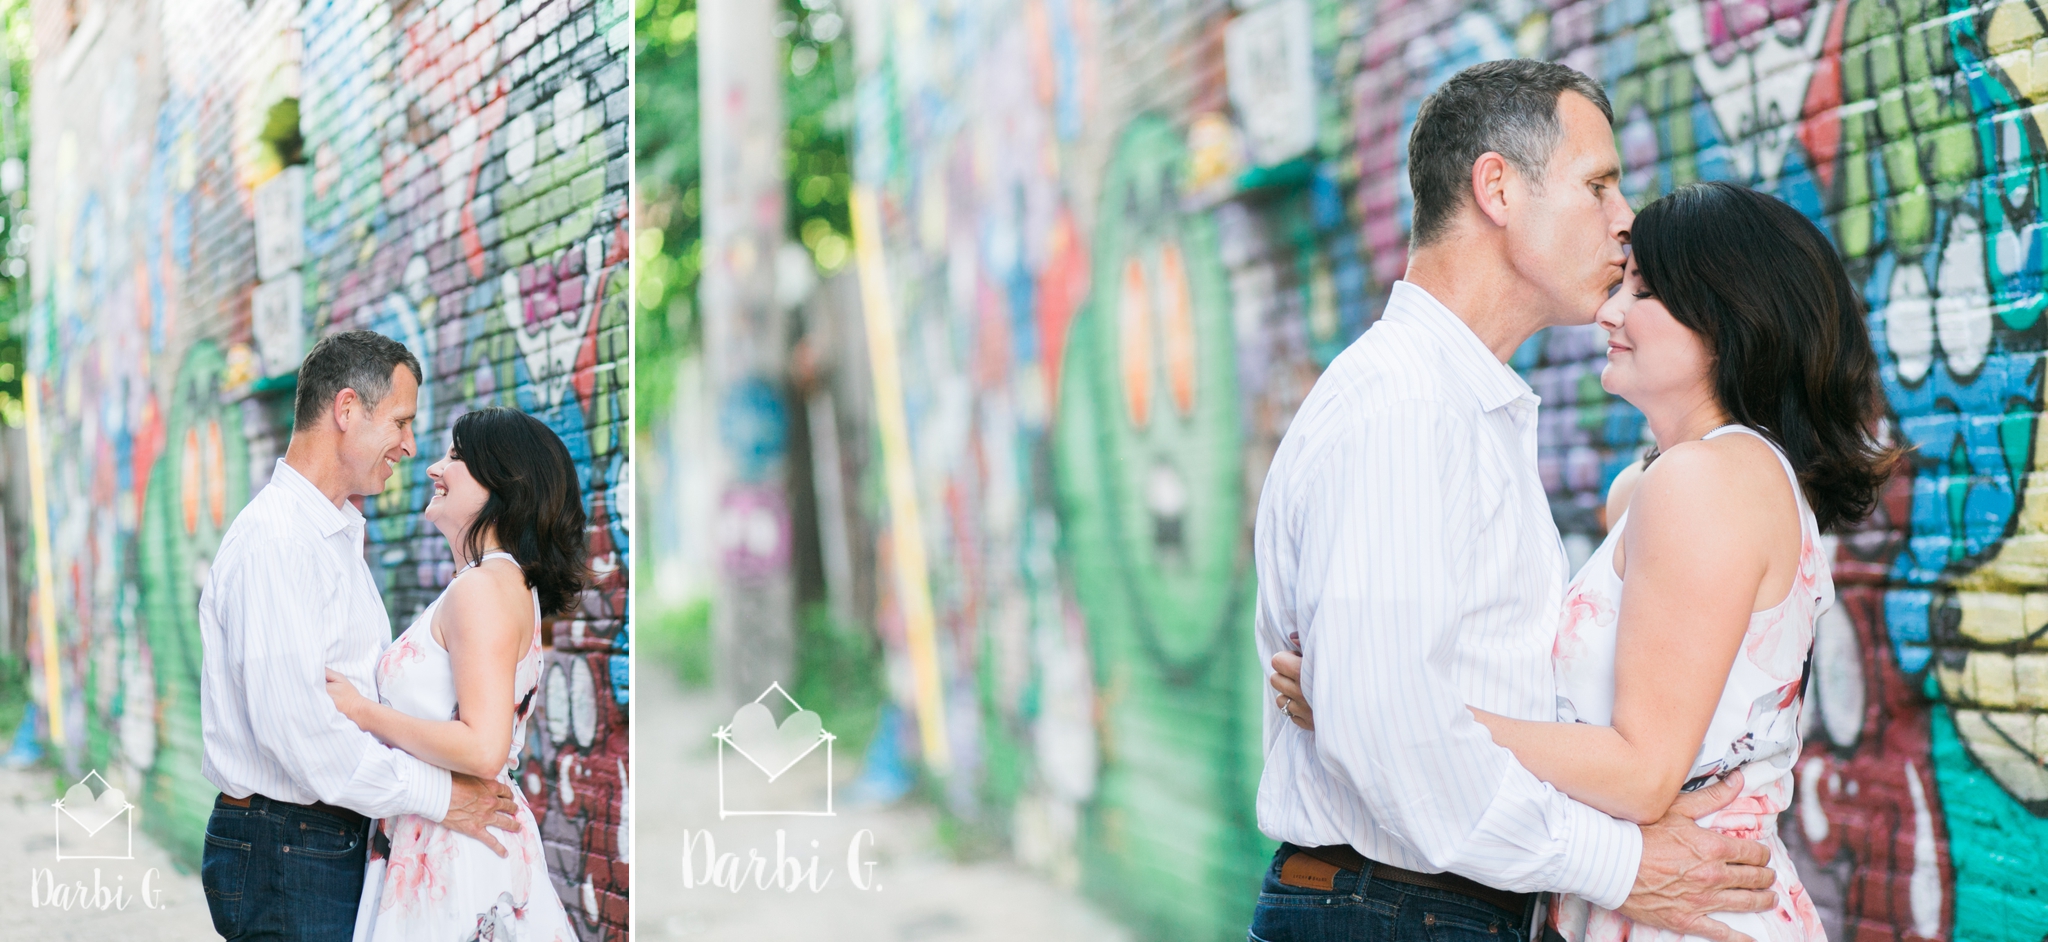 urban engagement session in the crossroads with kansas city photographer Darbi G. 